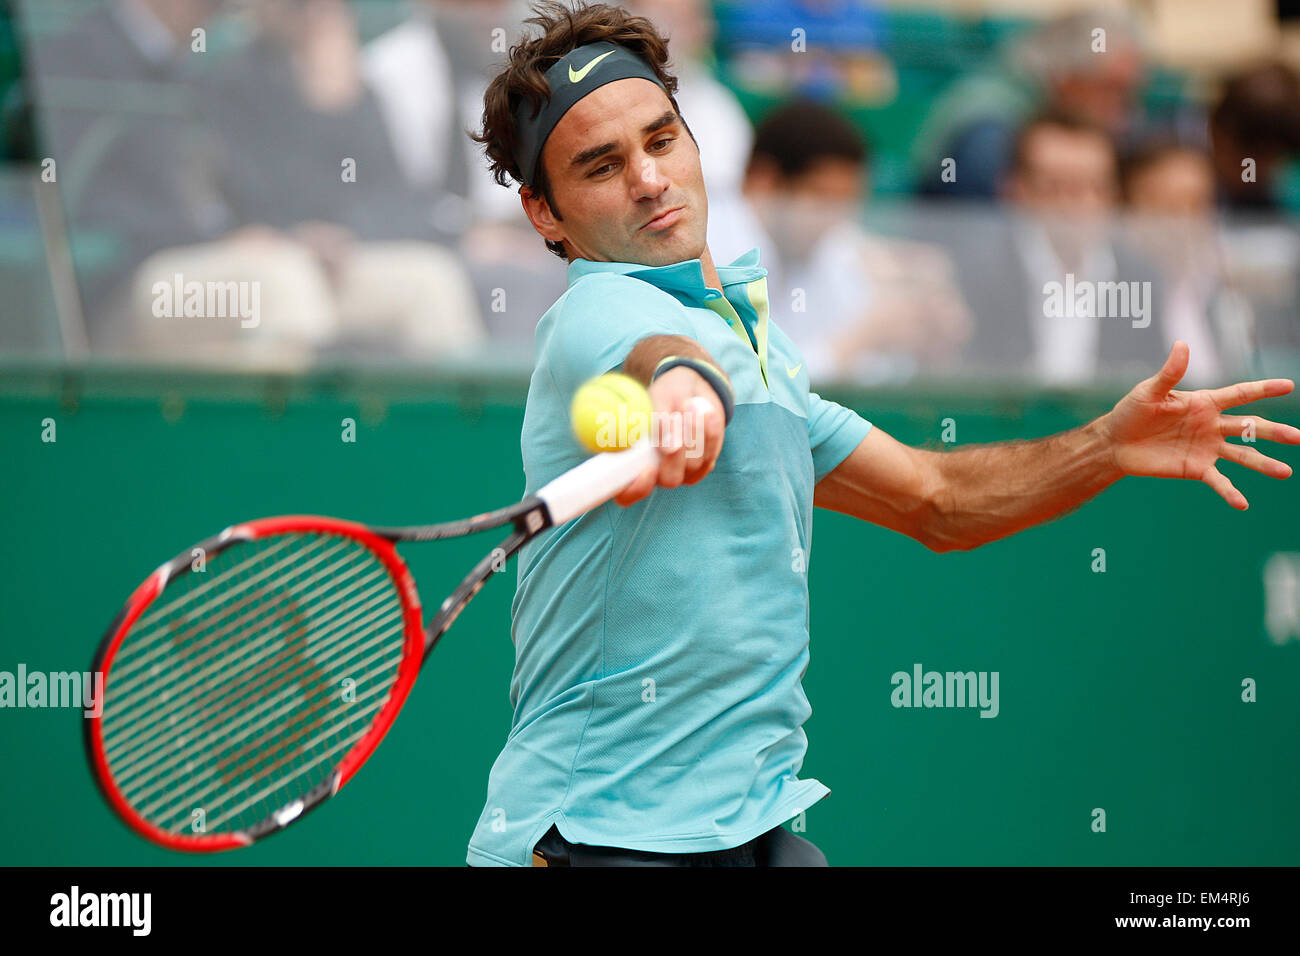 Monte Carlo, Monaco. 16th April, 2015. Roger Federer in action against Gael  Monfils, ATP Tennis Monte-Carlo Rolex Masters played at the Monte Carlo  Country Club, Monaco. © Credit: Jimmy Whhittee/Alamy Live News